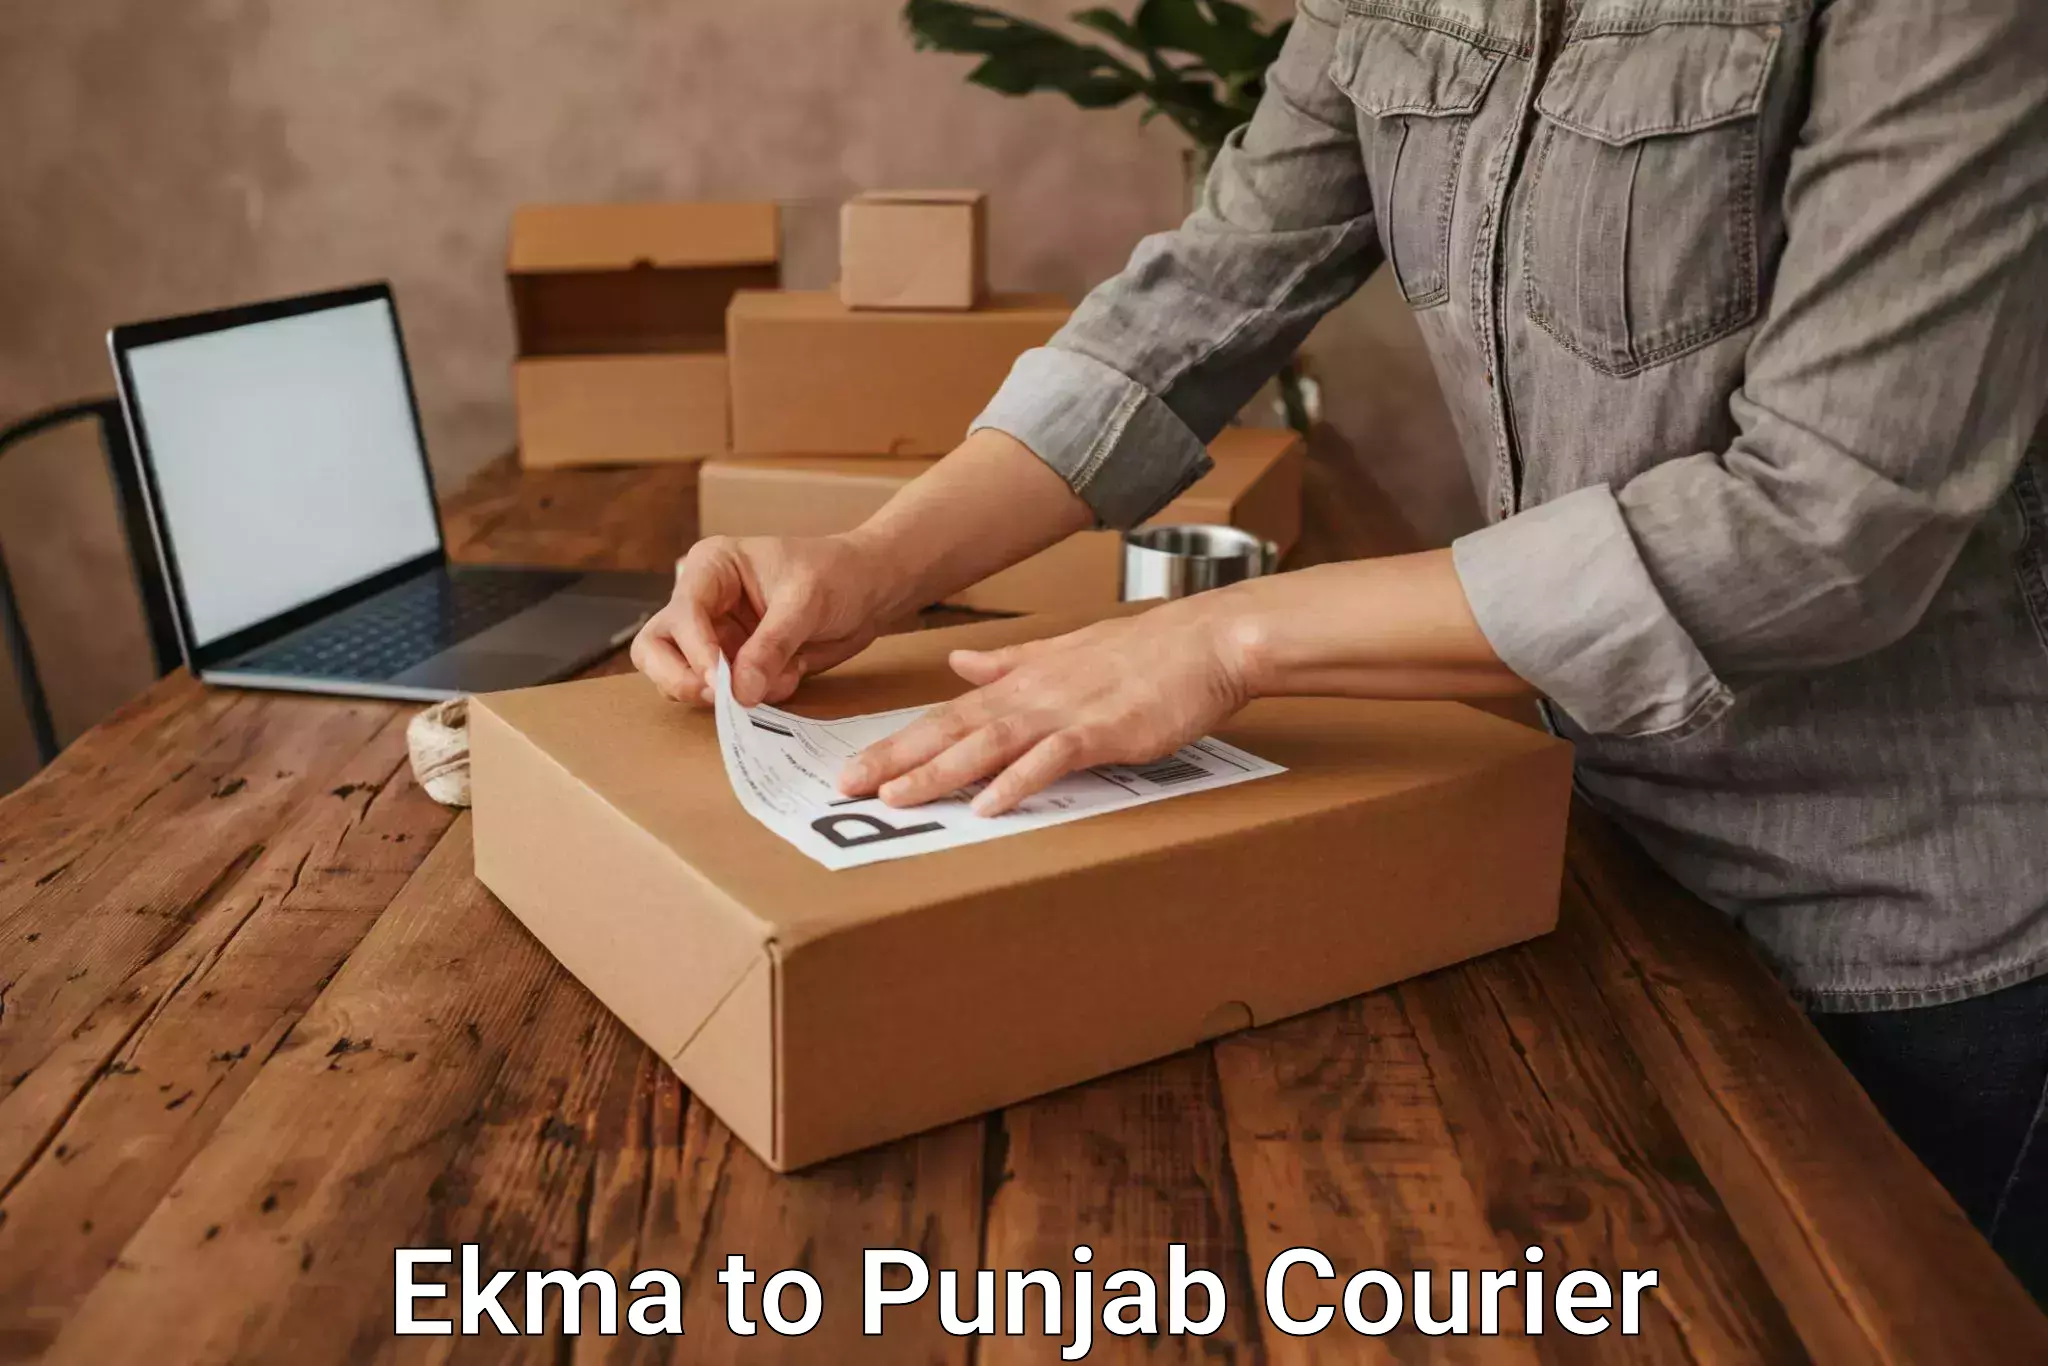 Trusted relocation experts Ekma to Punjab